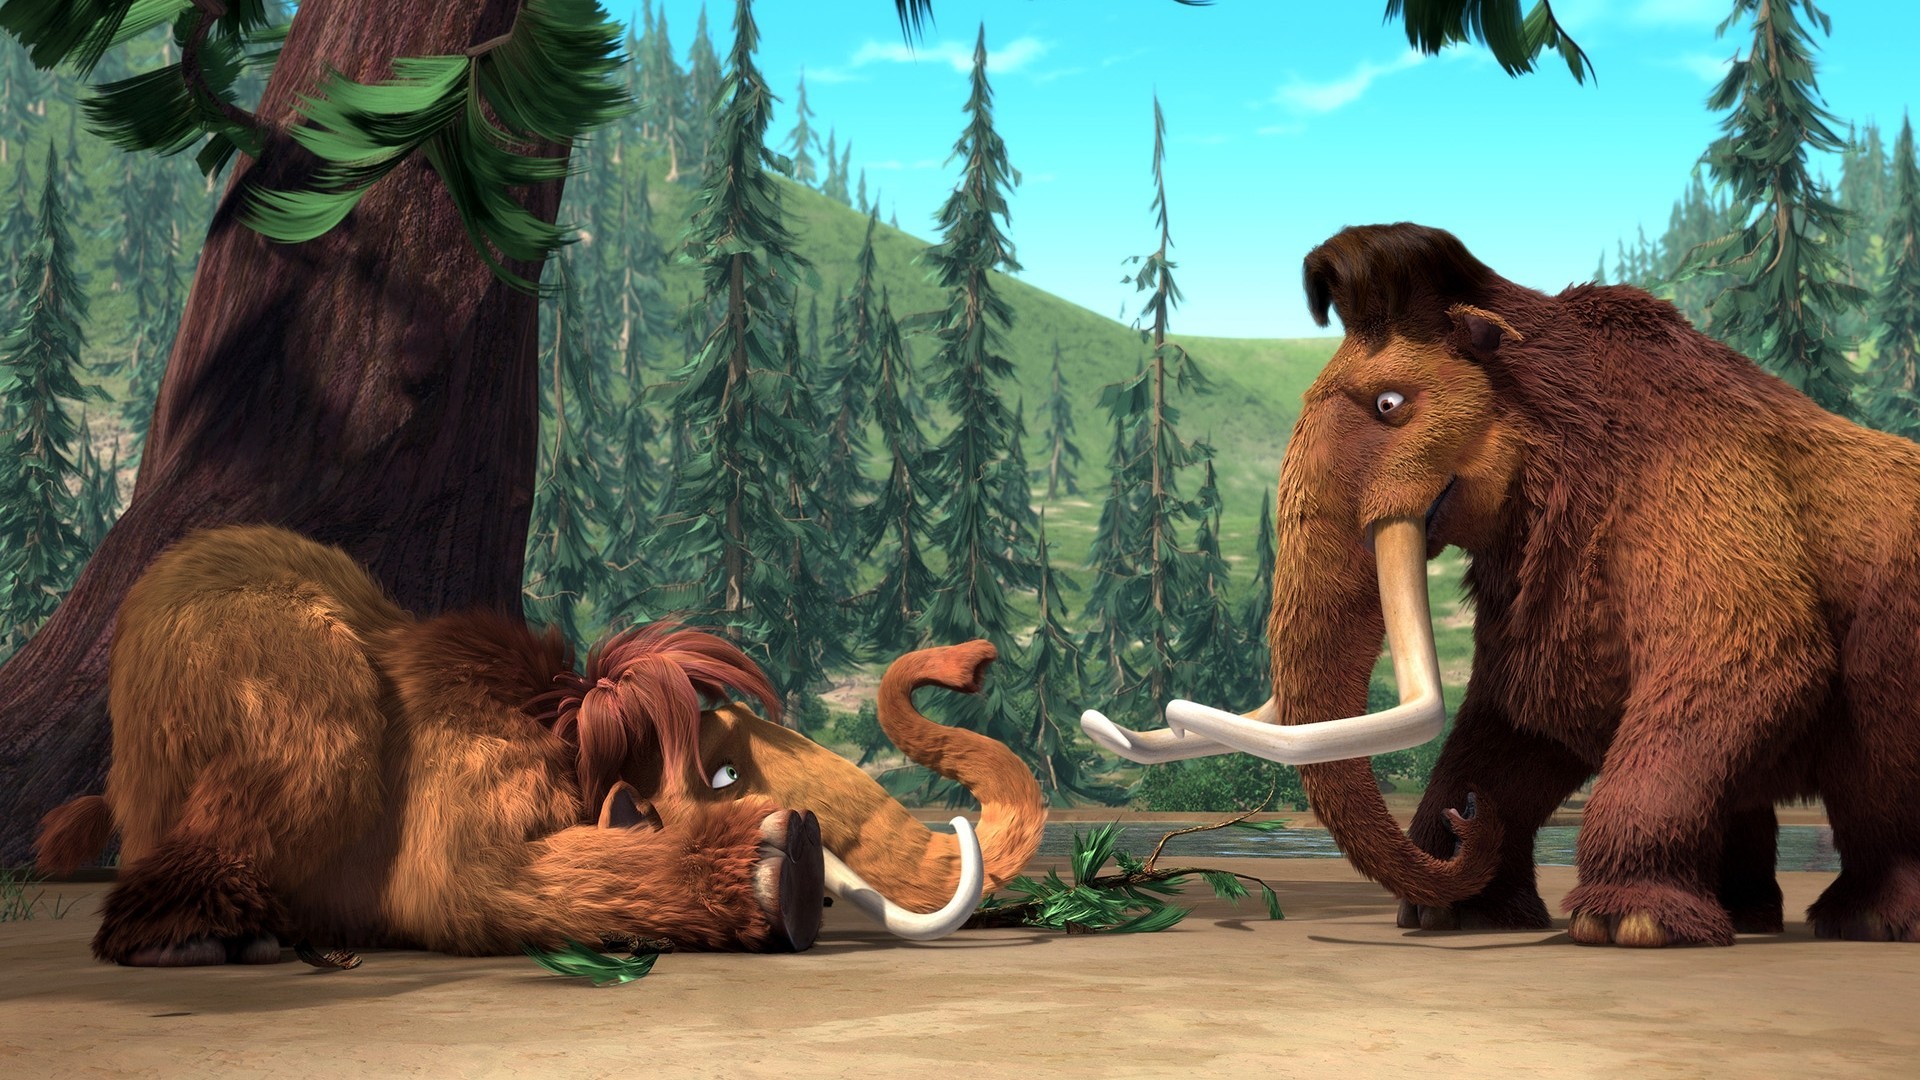 General 1920x1080 movies Ice Age Ice Age: The Meltdown animated movies